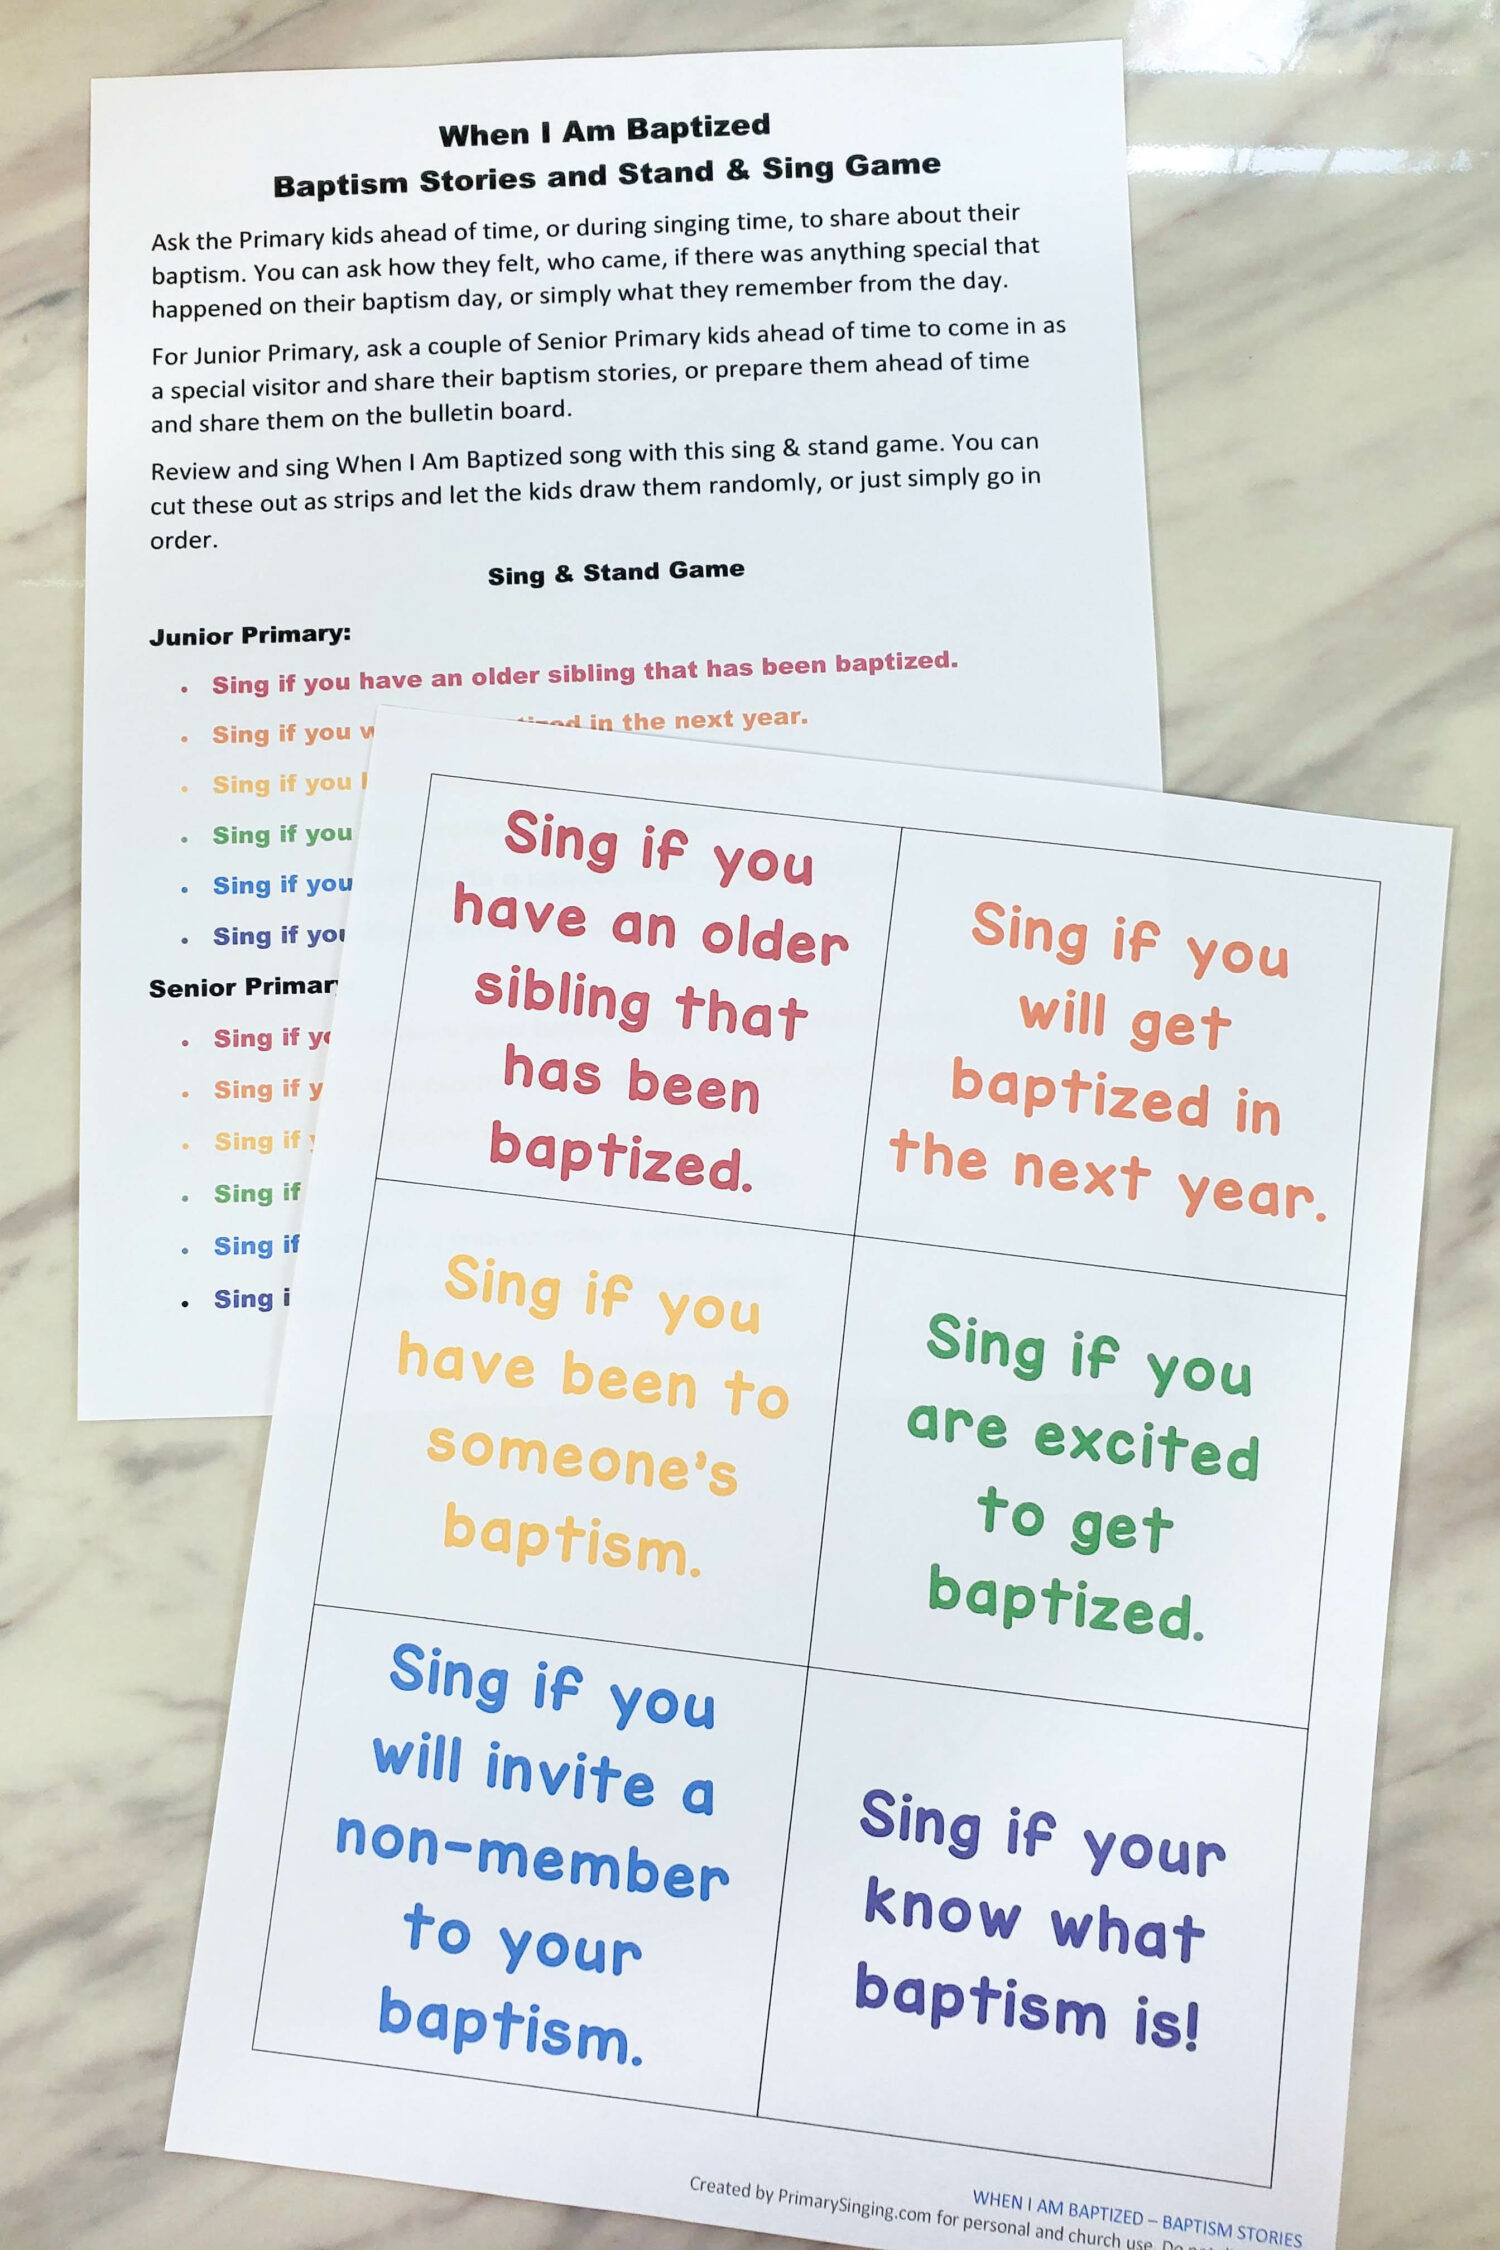 When I Am Baptized Stories Stand and Sing fun prompts to divide your Primary children into 2 groups to sing through the song. Activity for LDS Primary music leaders.